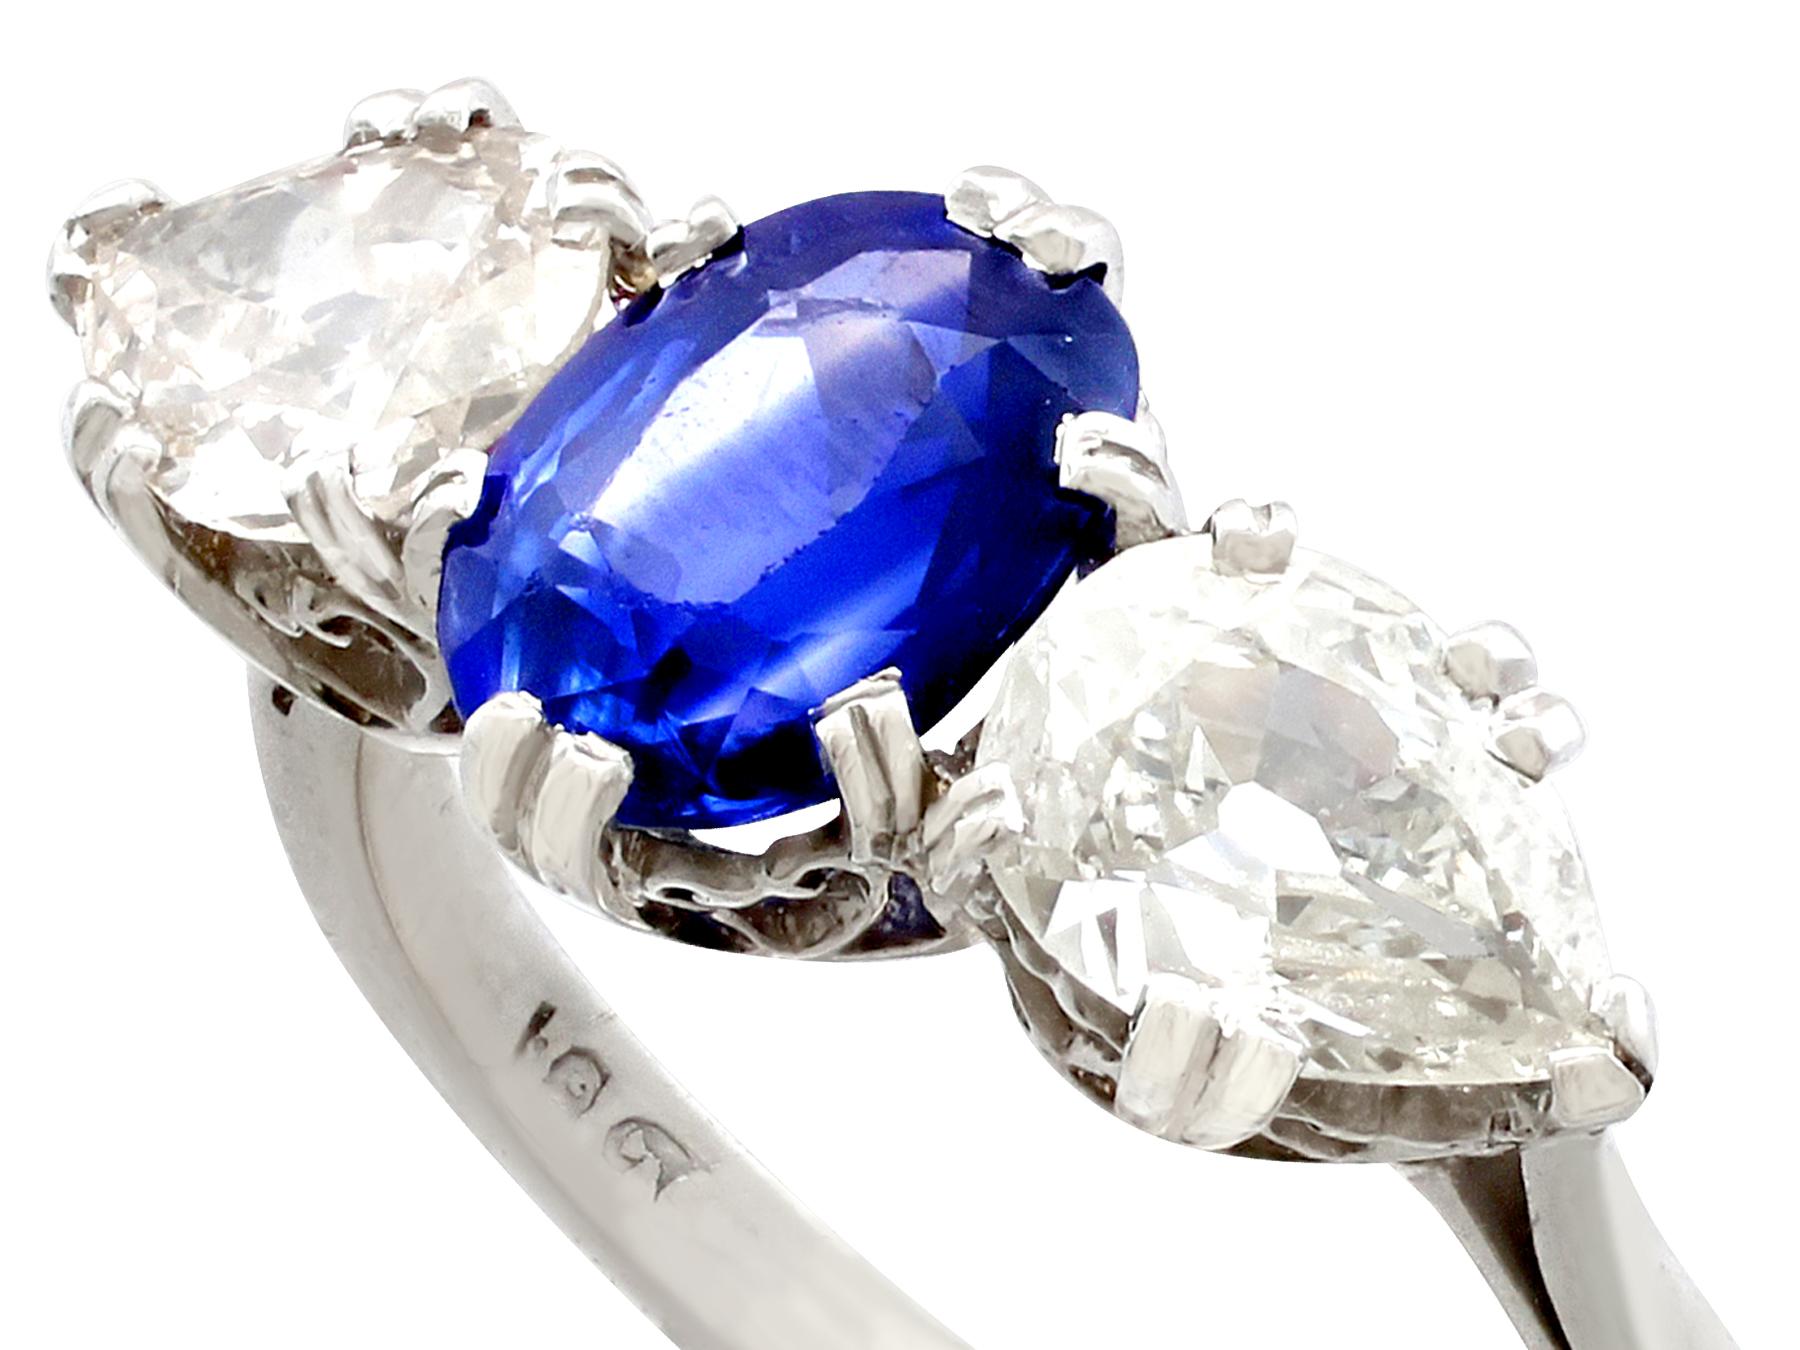 A stunning 2.30 carat Ceylon sapphire and 1.38 carat diamond, 18 karat white gold trilogy ring; part of our diverse gemstone jewellery and estate jewelry collections.

This stunning, fine and impressive trilogy engagement ring has been crafted in